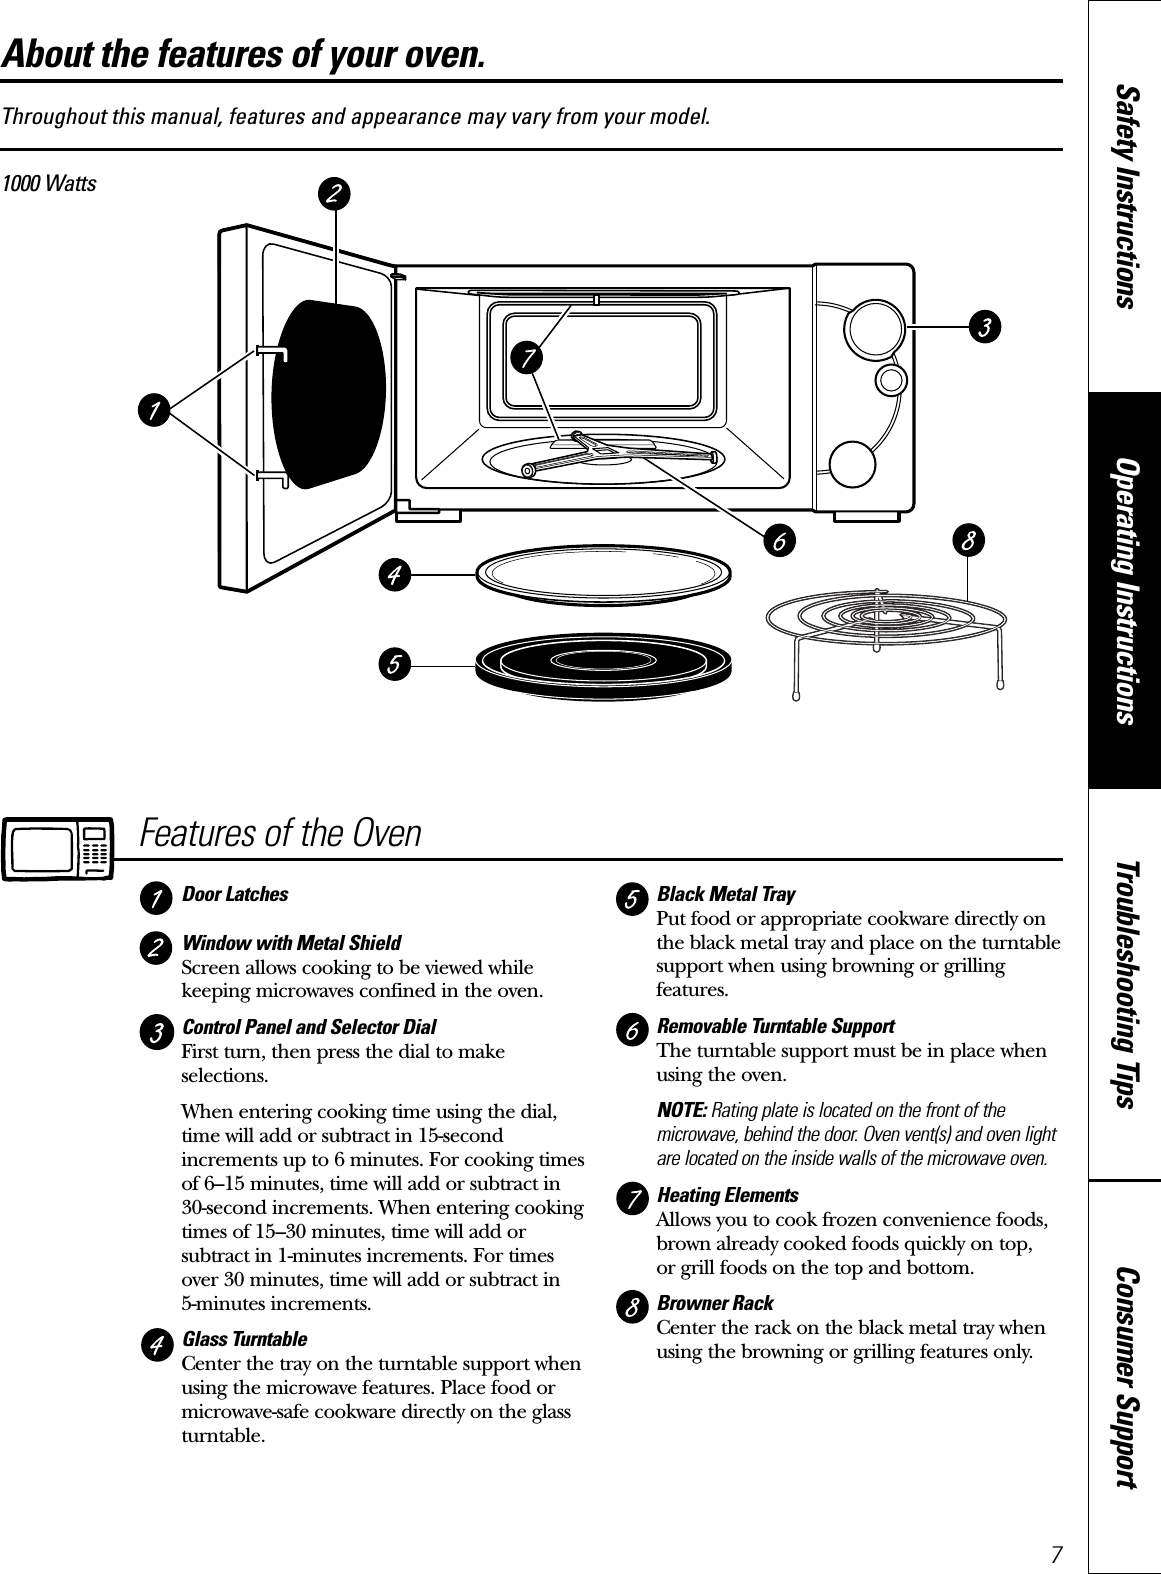 7Consumer SupportTroubleshooting TipsOperating InstructionsSafety InstructionsThroughout this manual, features and appearance may vary from your model.1000 WattsFeatures of the OvenDoor LatchesWindow with Metal ShieldScreen allows cooking to be viewed whilekeeping microwaves confined in the oven.Control Panel and Selector Dial First turn, then press the dial to makeselections. When entering cooking time using the dial,time will add or subtract in 15-secondincrements up to 6 minutes. For cooking timesof 6–15 minutes, time will add or subtract in30-second increments. When entering cookingtimes of 15–30 minutes, time will add orsubtract in 1-minutes increments. For timesover 30 minutes, time will add or subtract in 5-minutes increments.Glass TurntableCenter the tray on the turntable support whenusing the microwave features. Place food ormicrowave-safe cookware directly on the glassturntable.Black Metal Tray Put food or appropriate cookware directly onthe black metal tray and place on the turntablesupport when using browning or grillingfeatures.Removable Turntable Support The turntable support must be in place whenusing the oven.NOTE: Rating plate is located on the front of themicrowave, behind the door. Oven vent(s) and oven lightare located on the inside walls of the microwave oven.Heating Elements Allows you to cook frozen convenience foods,brown already cooked foods quickly on top, or grill foods on the top and bottom.Browner Rack Center the rack on the black metal tray whenusing the browning or grilling features only.About the features of your oven. 